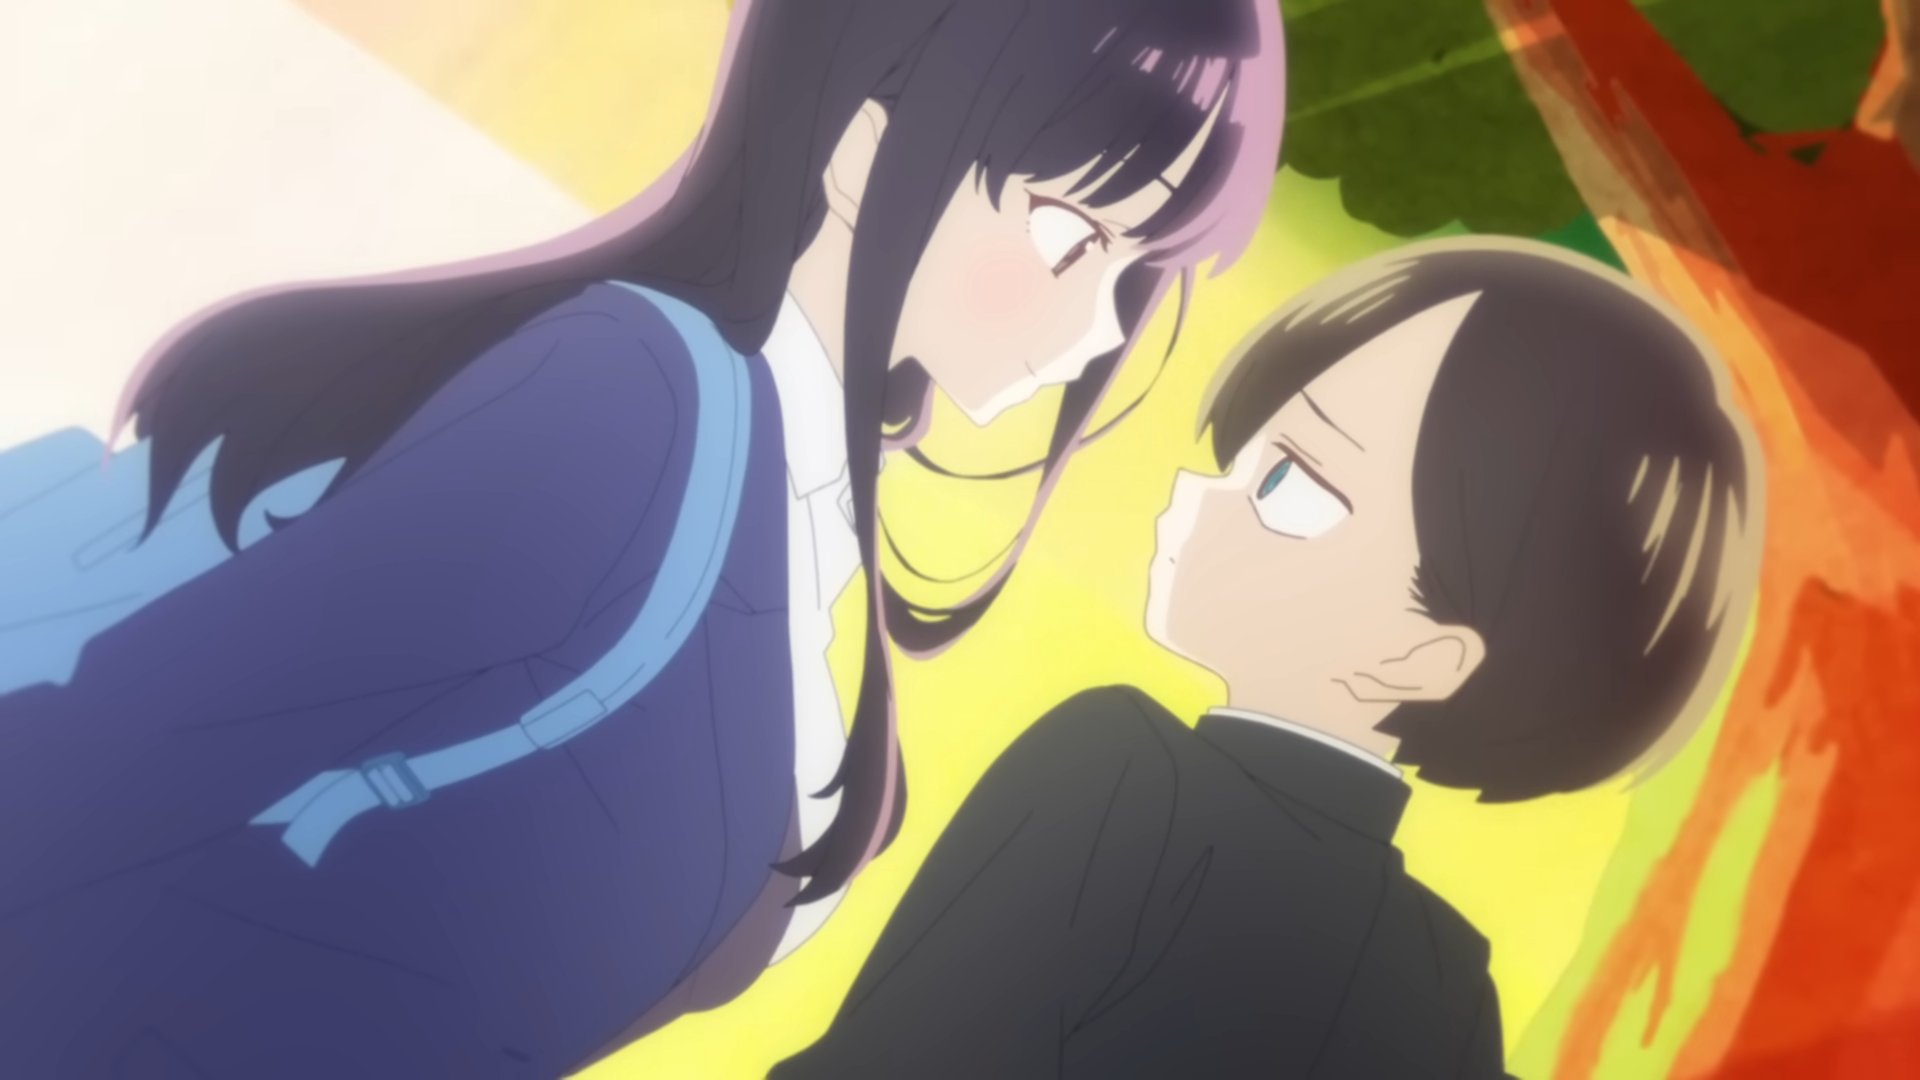 The Dangers in My Heart TV Anime Shares Episode 6’s Emotional Moment in New Visual